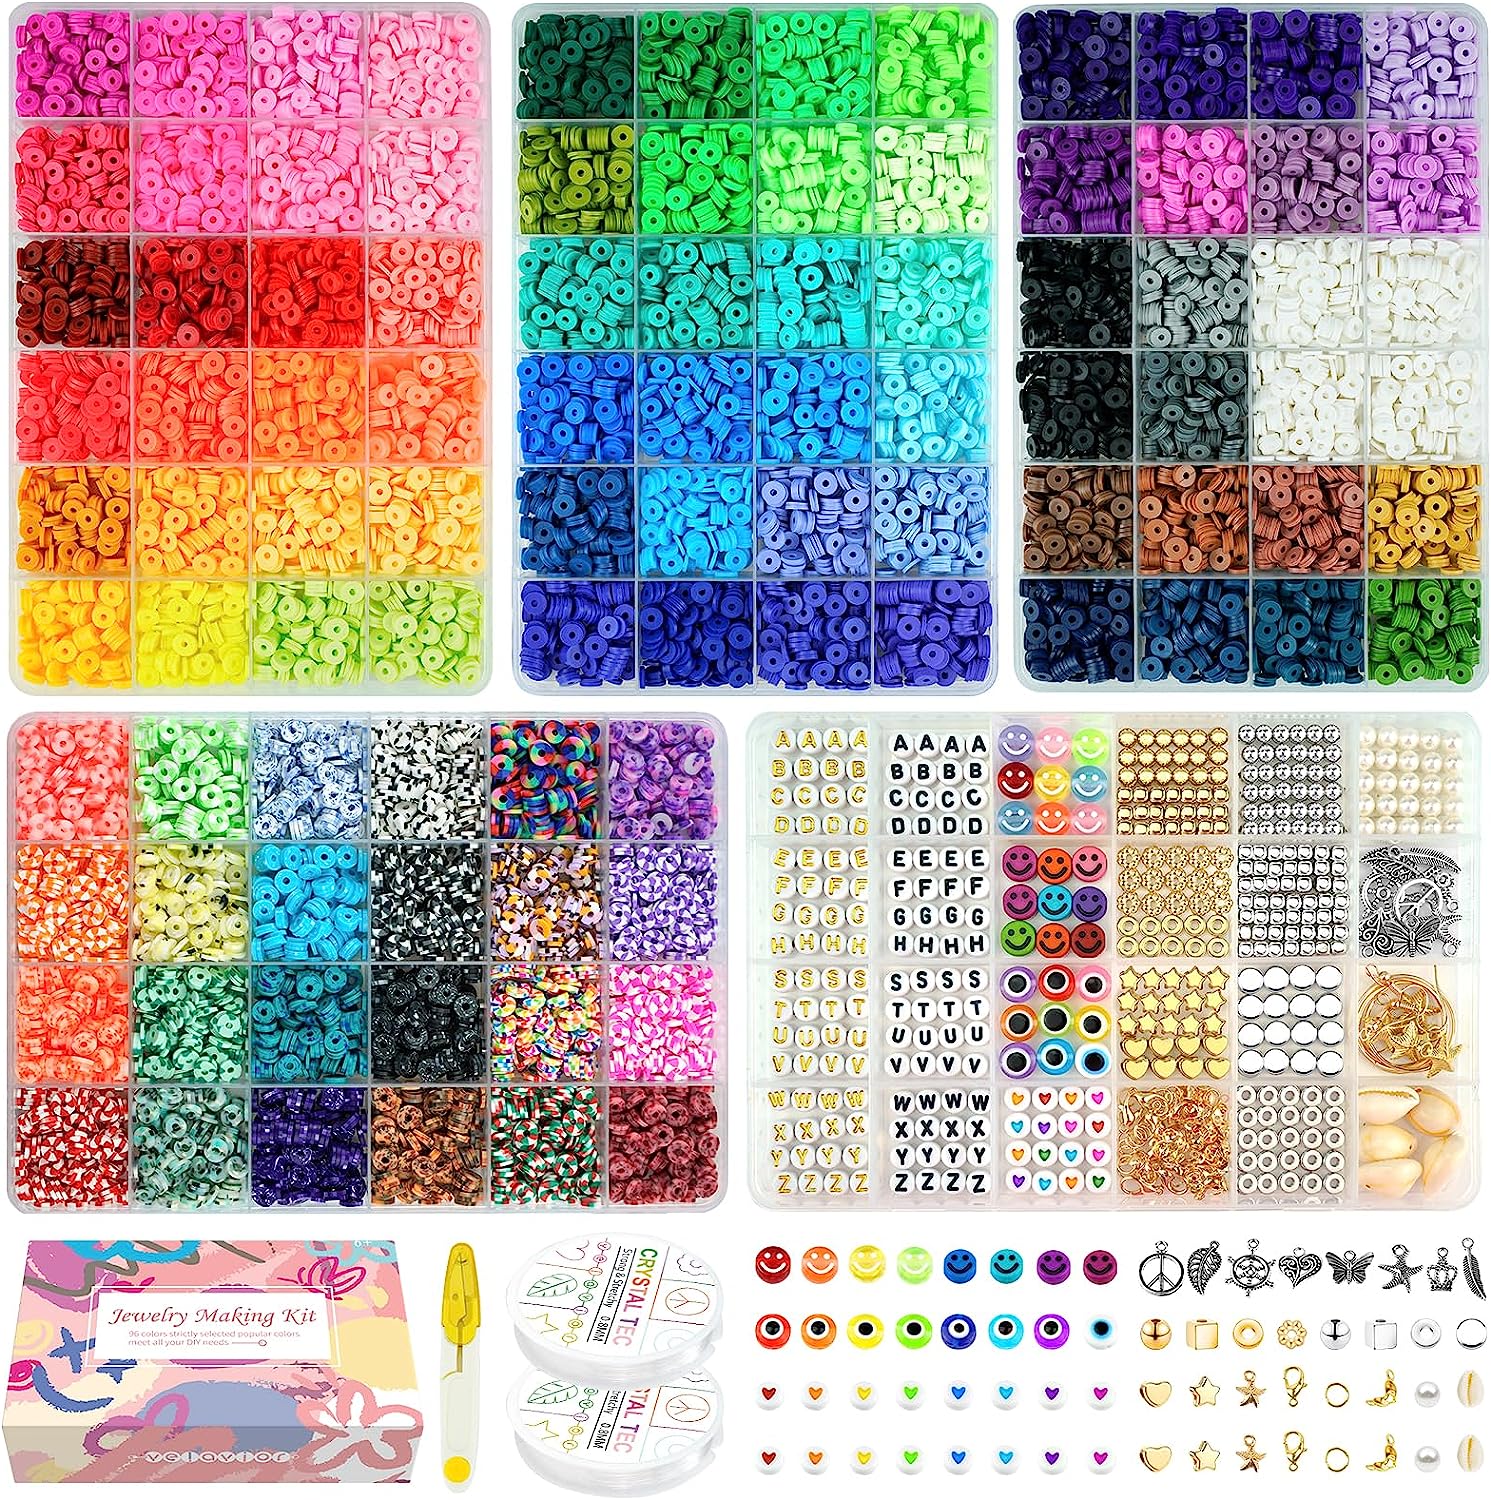 Redtwo 19,000pcs Clay Beads Bracelet Making Kit 120 Colors, 6 Boxes Flat  Preppy Heishi Beads with Charms for Friendship Jewelry Making Kit, Craft